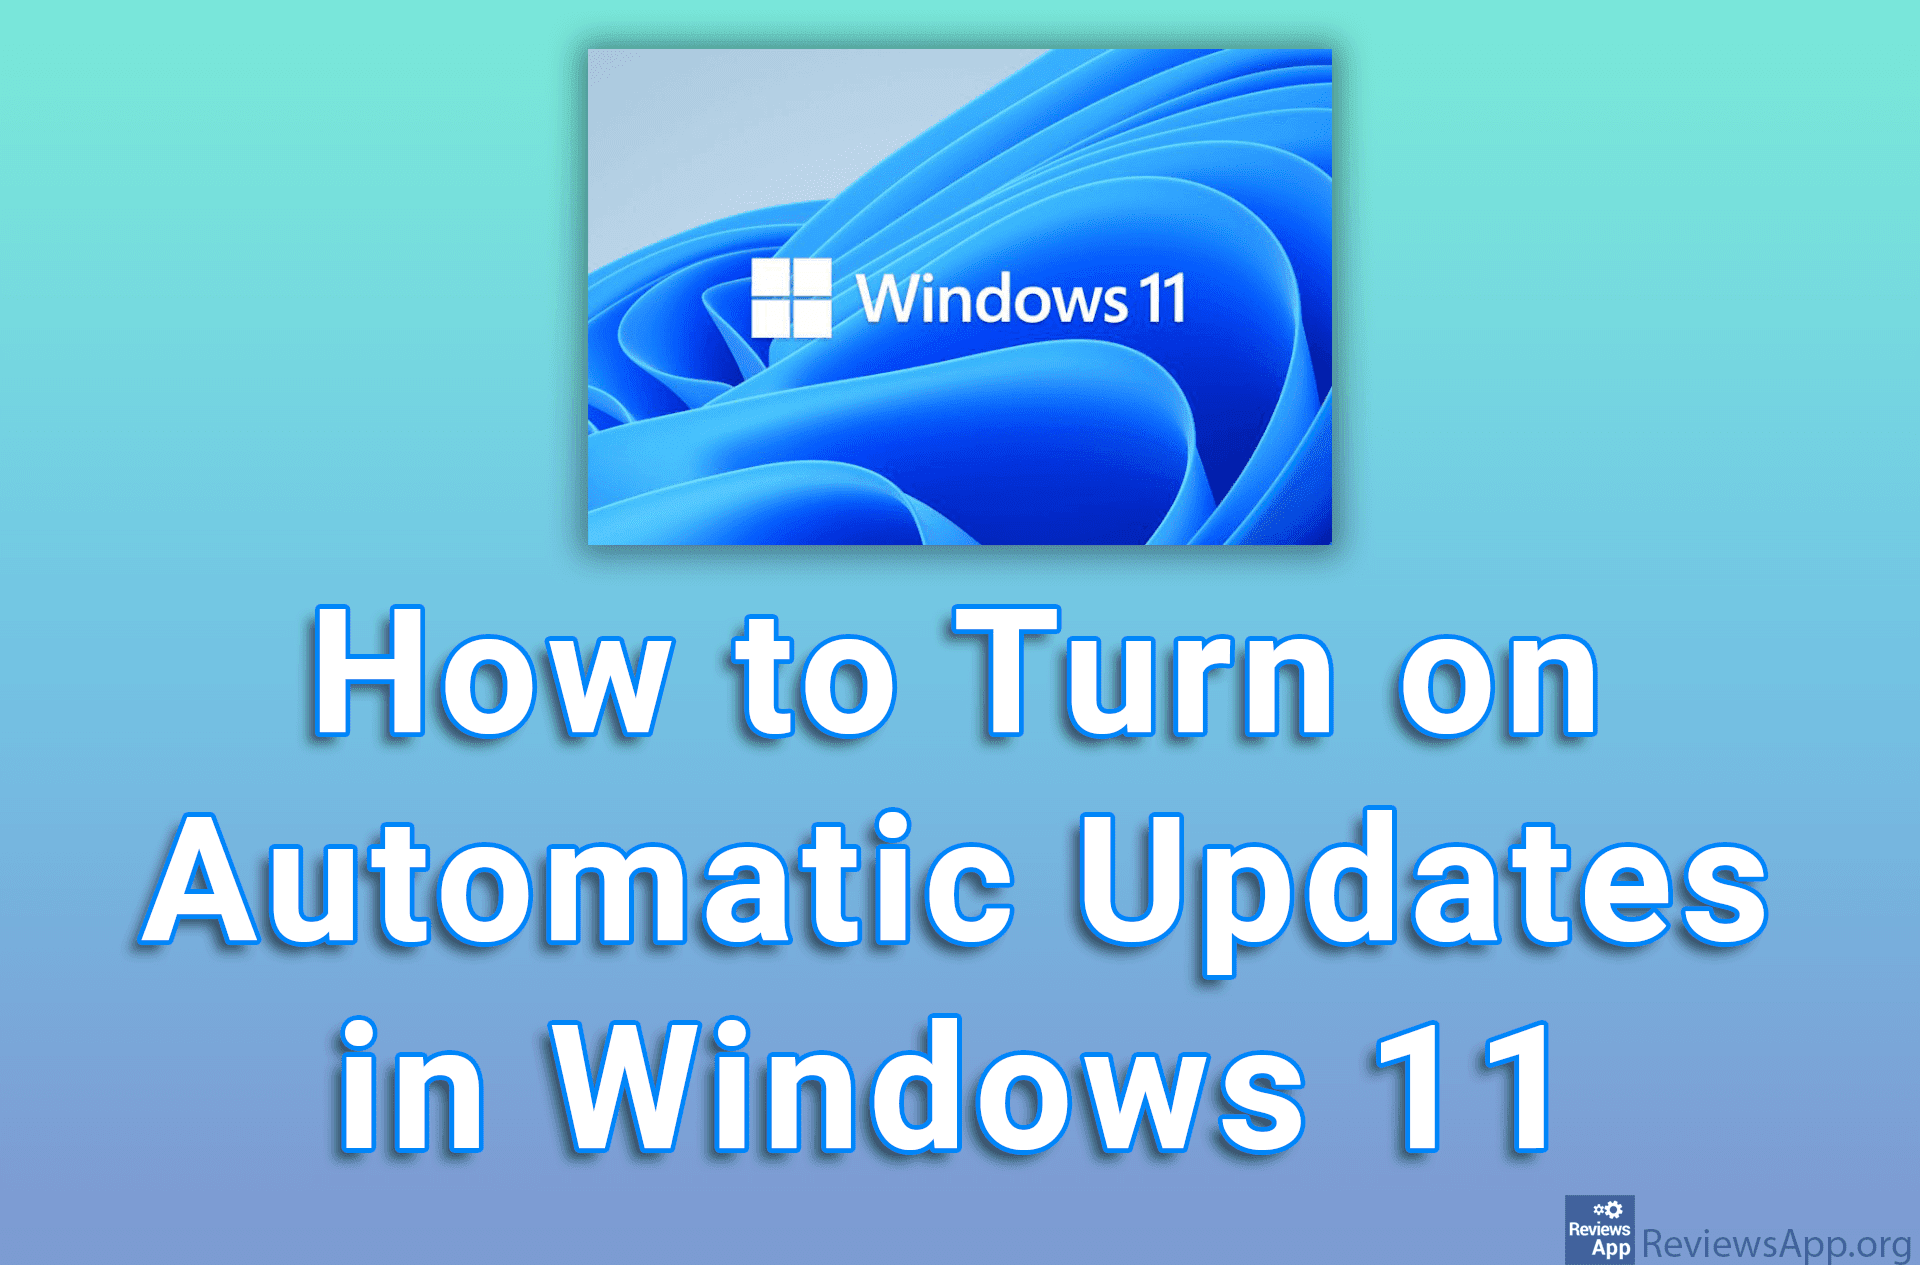 How to Turn on Automatic Updates in Windows 11